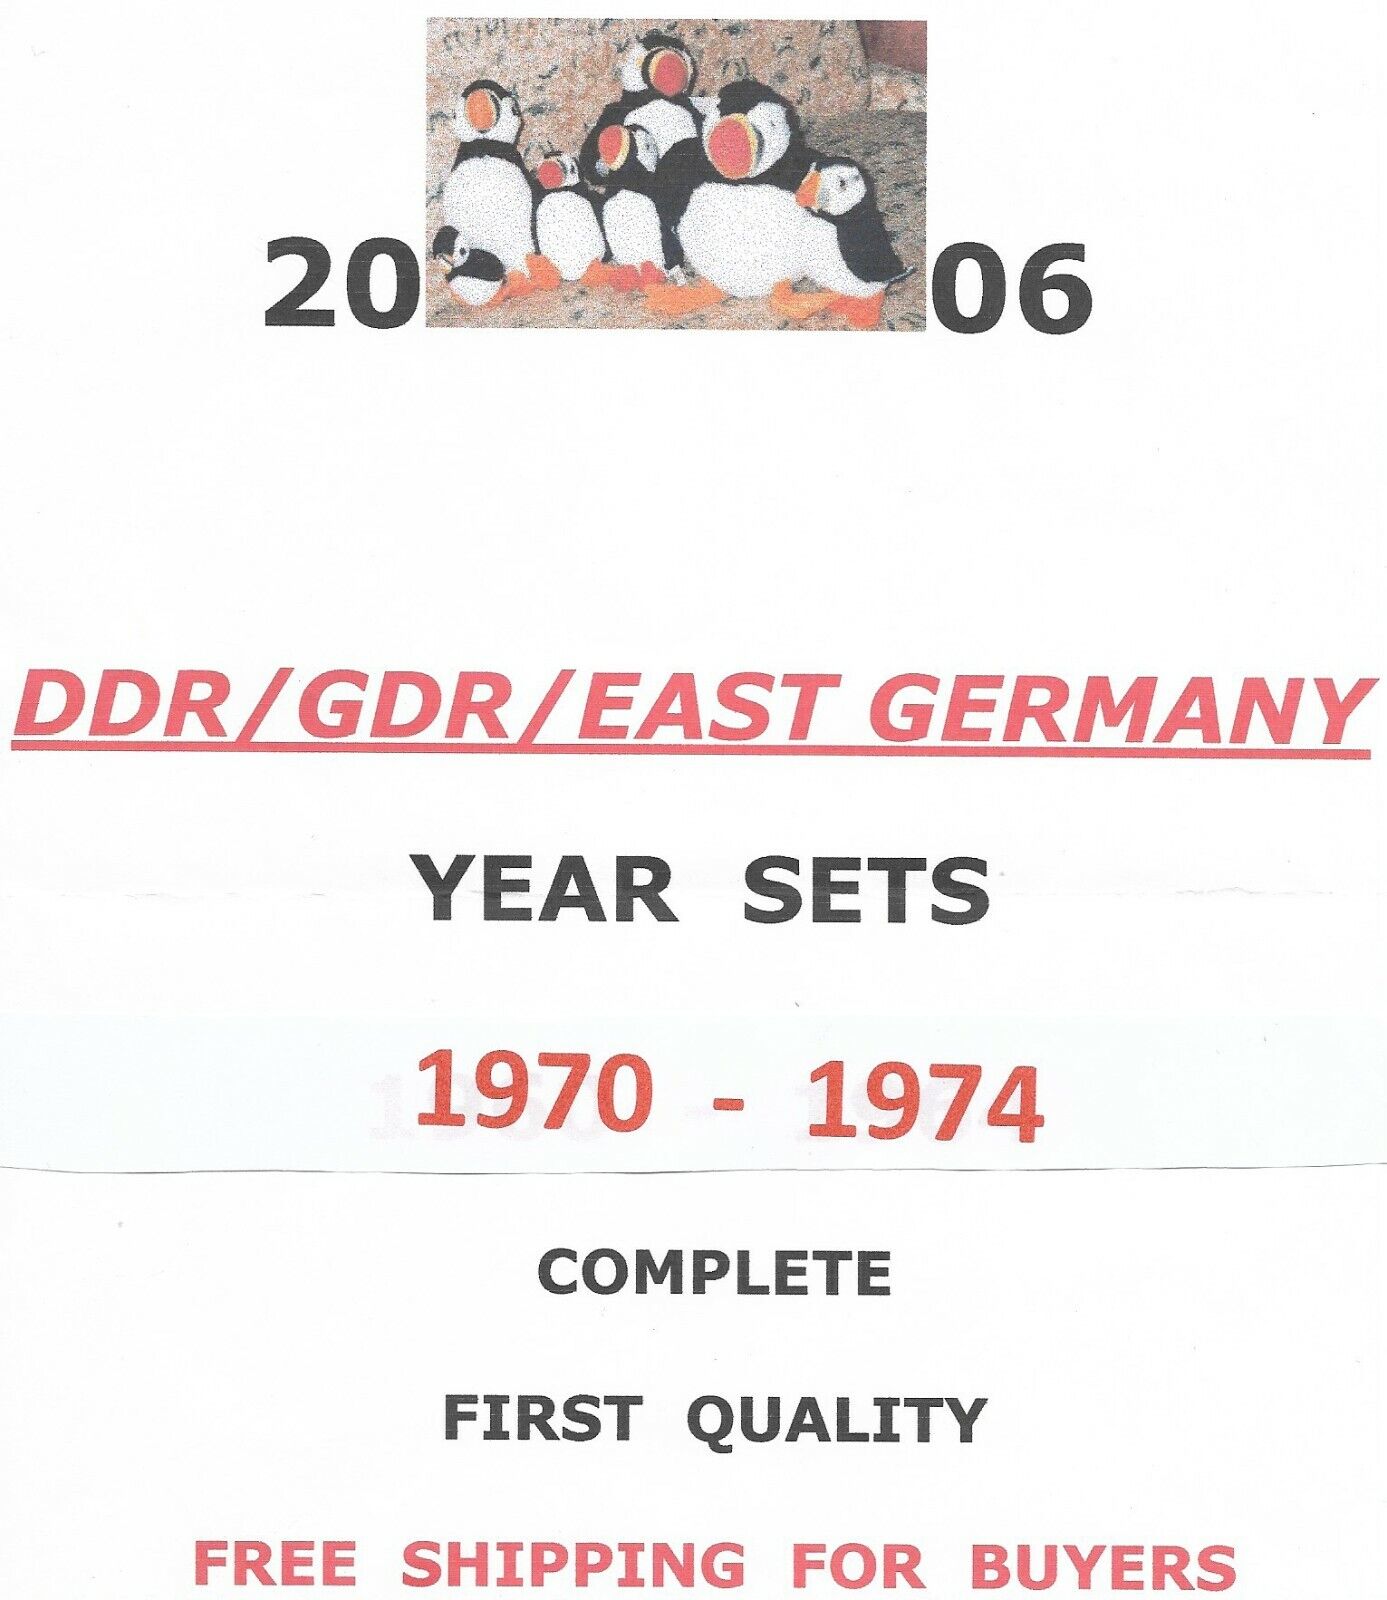 East-Germany/GDR/DDR: All stamps of 1970 - 1974 in a year set co